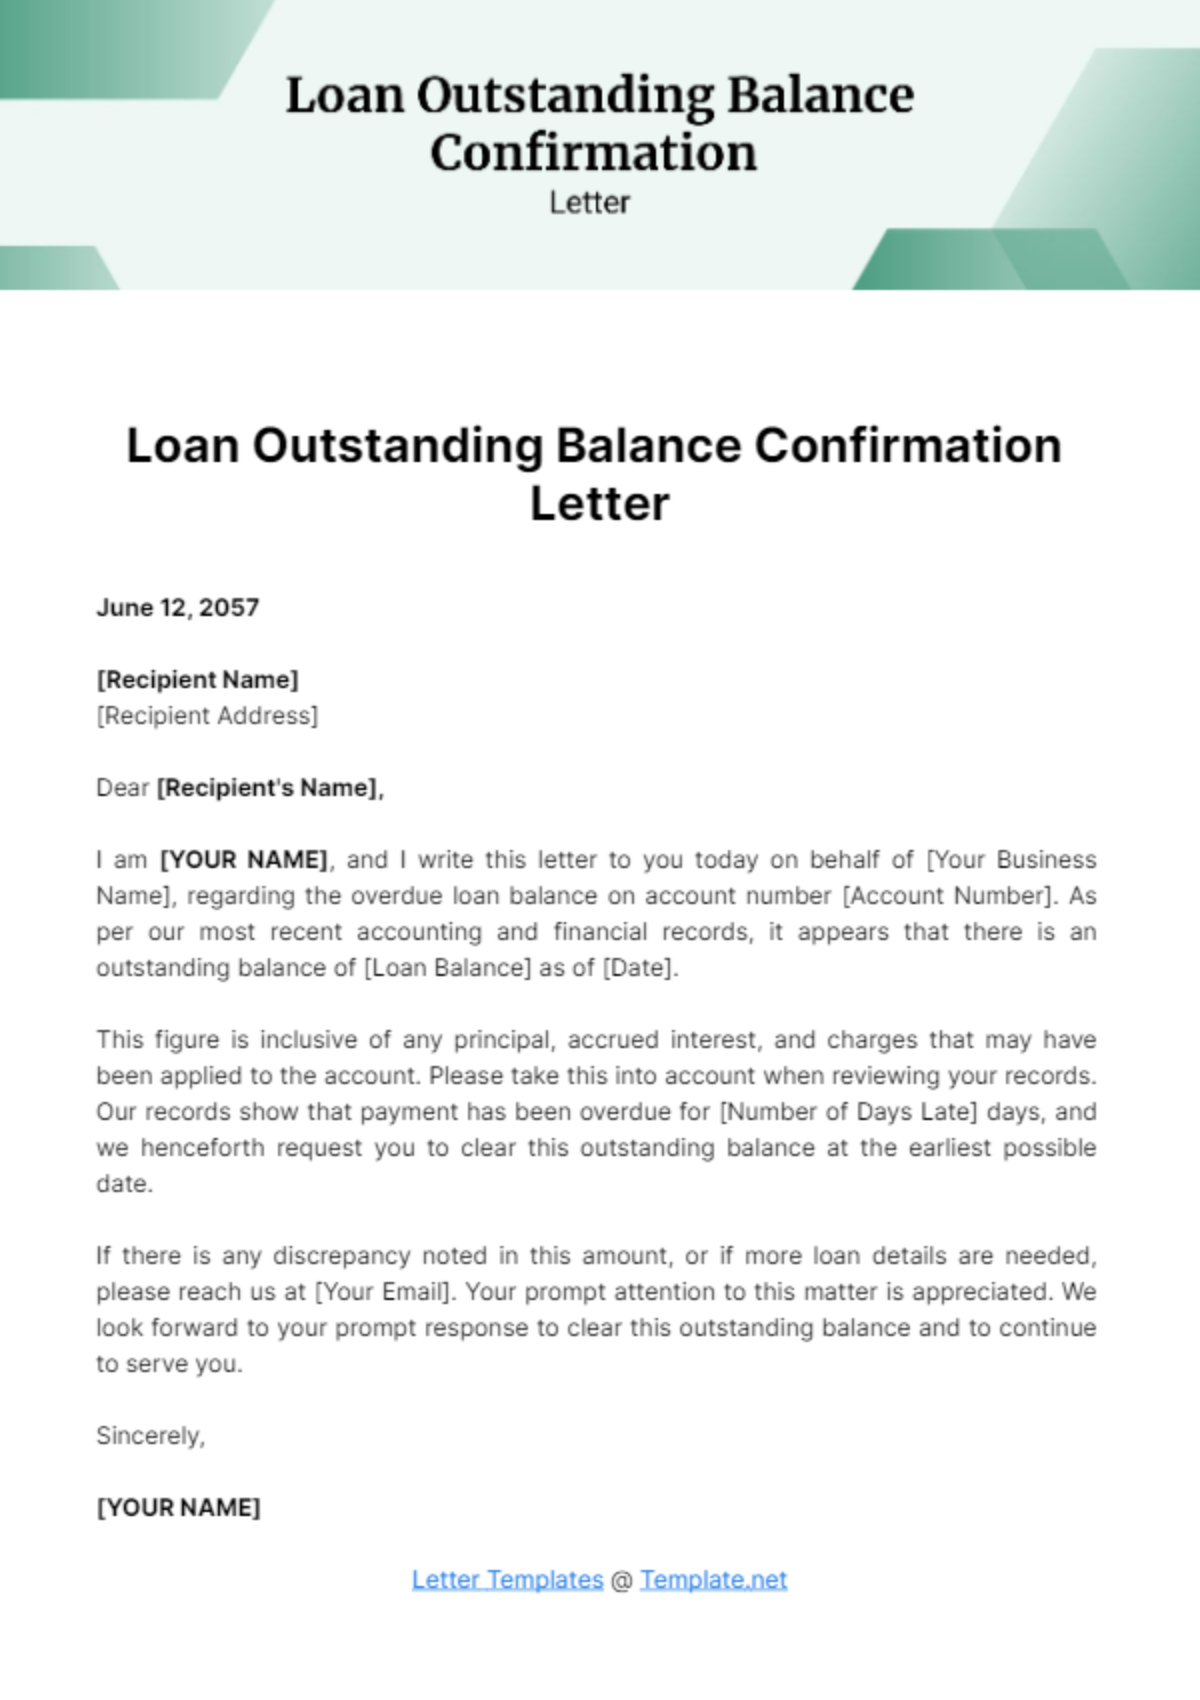 Free Loan Outstanding Balance Confirmation Letter Template